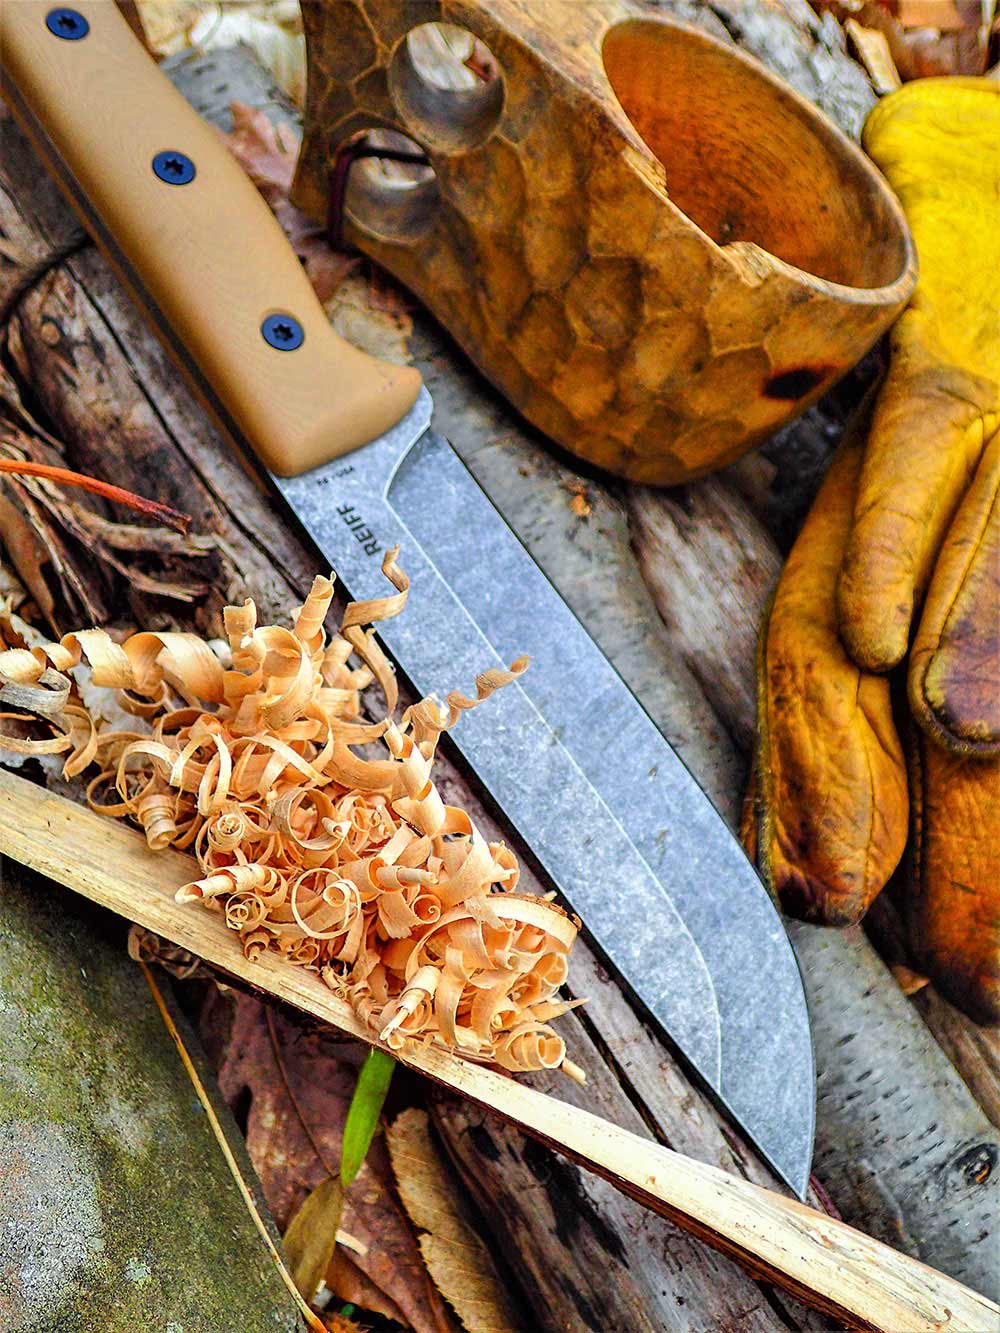 For fire prepping, the author tests every knife by making feather sticks.